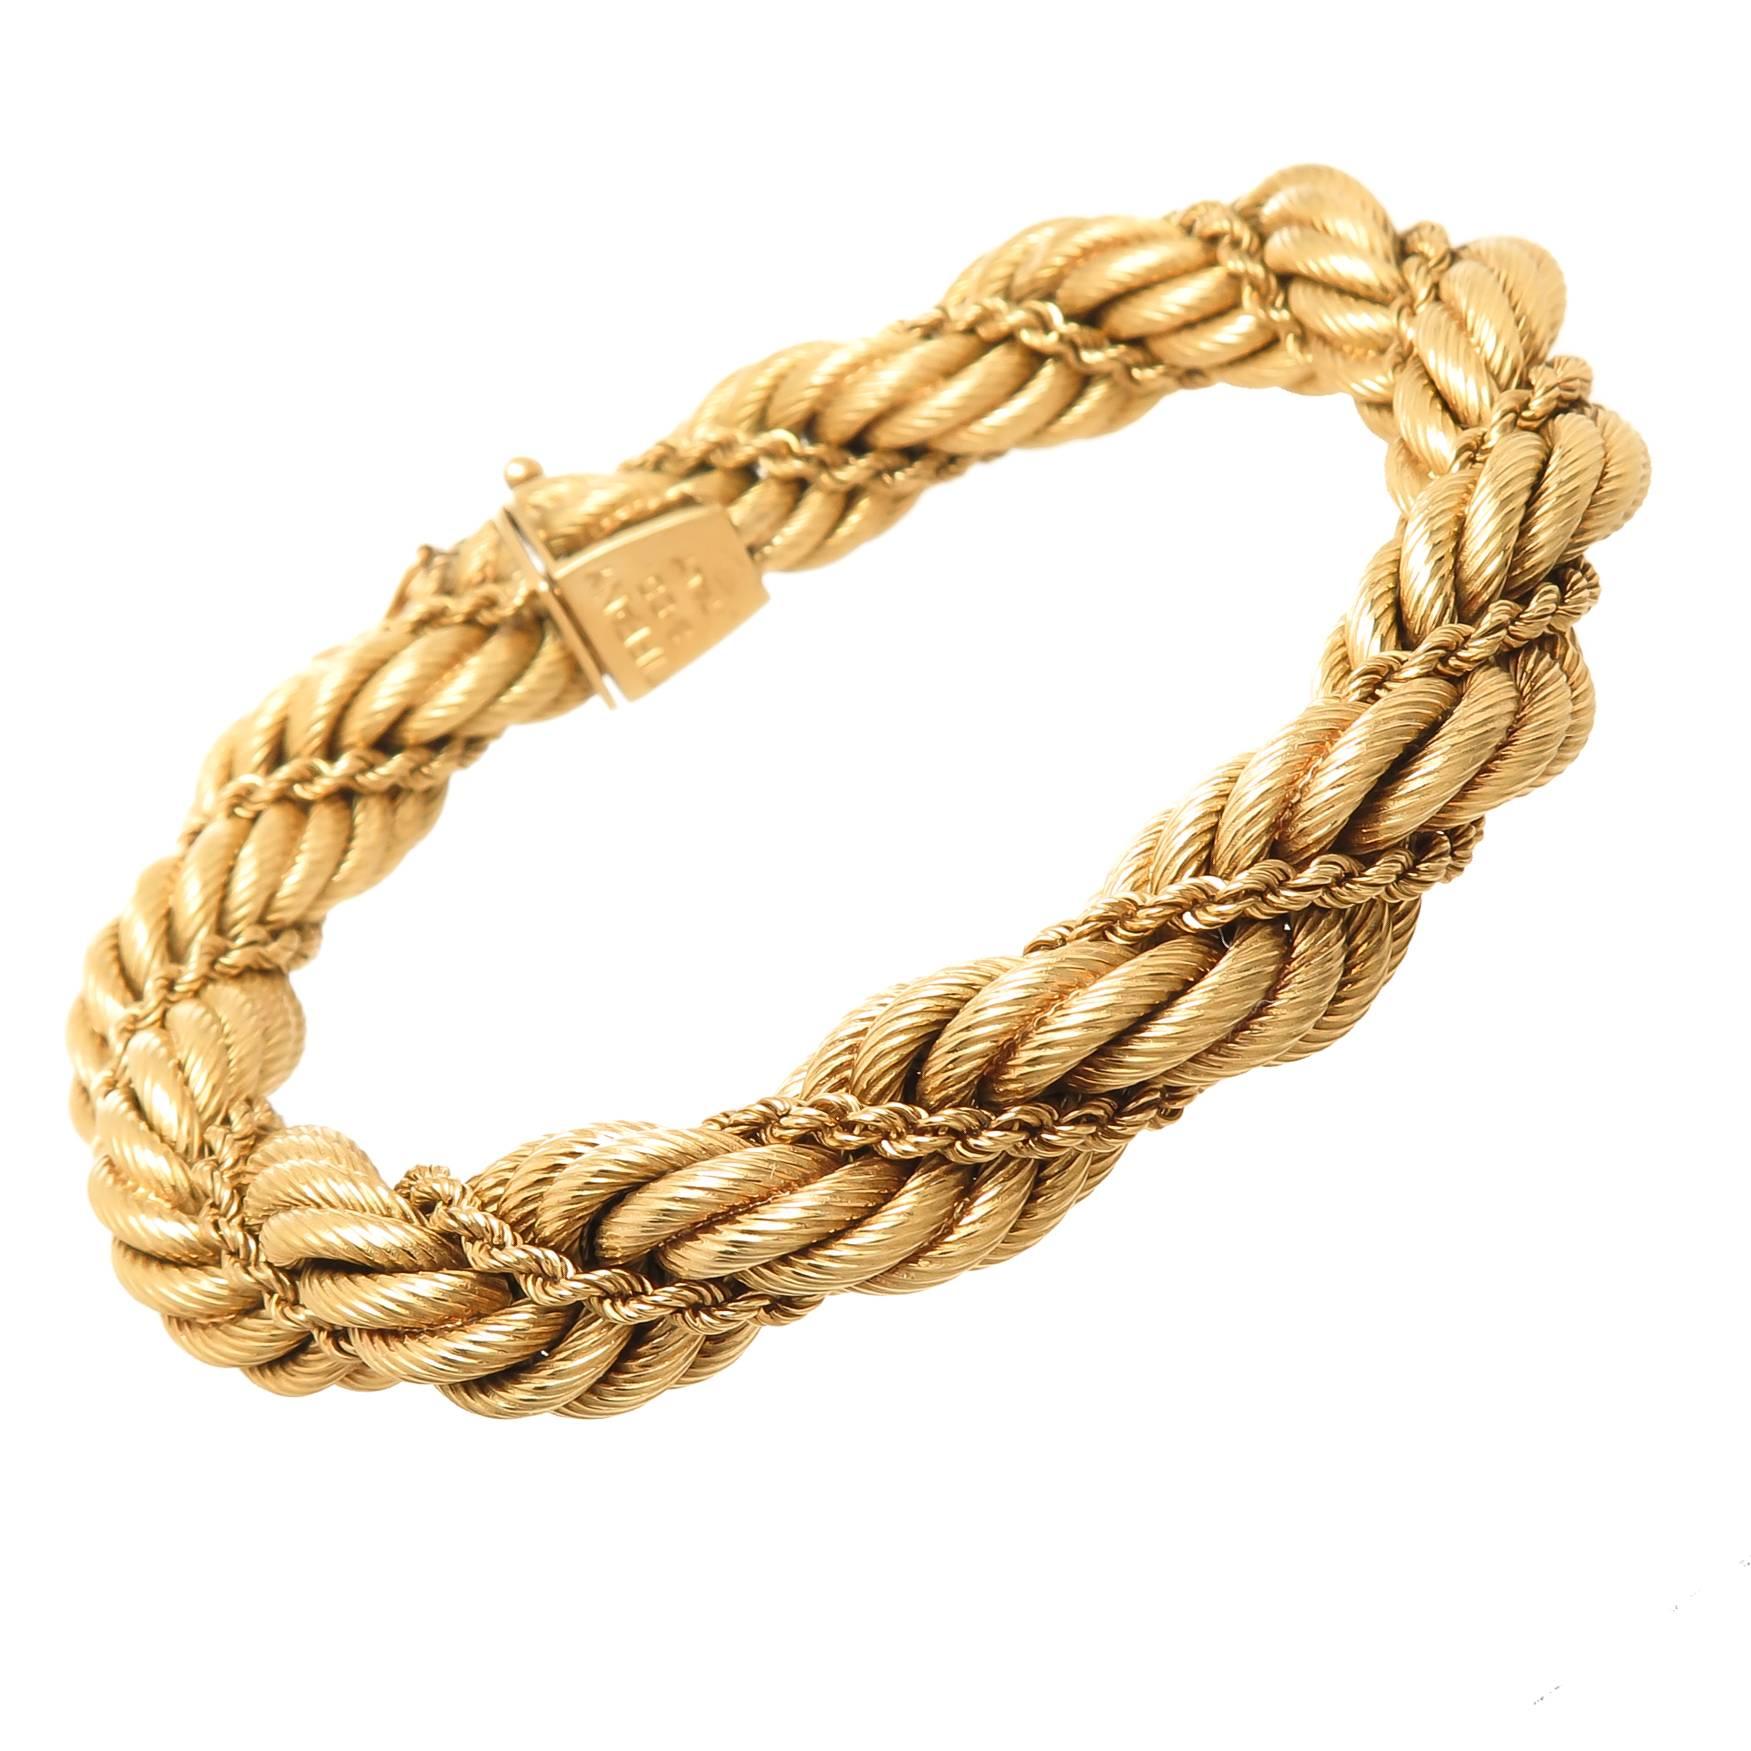 Circa 1970s Tiffany & Company very elegant 18k yellow Gold Rope Bracelet with a smaller Rope bracelet intertwined. measuring 7 3/4 inches in length, 7/16 inch wide and weighing 40.3 Grams. Excellent, near unworn condition and comes in a Tiffany felt